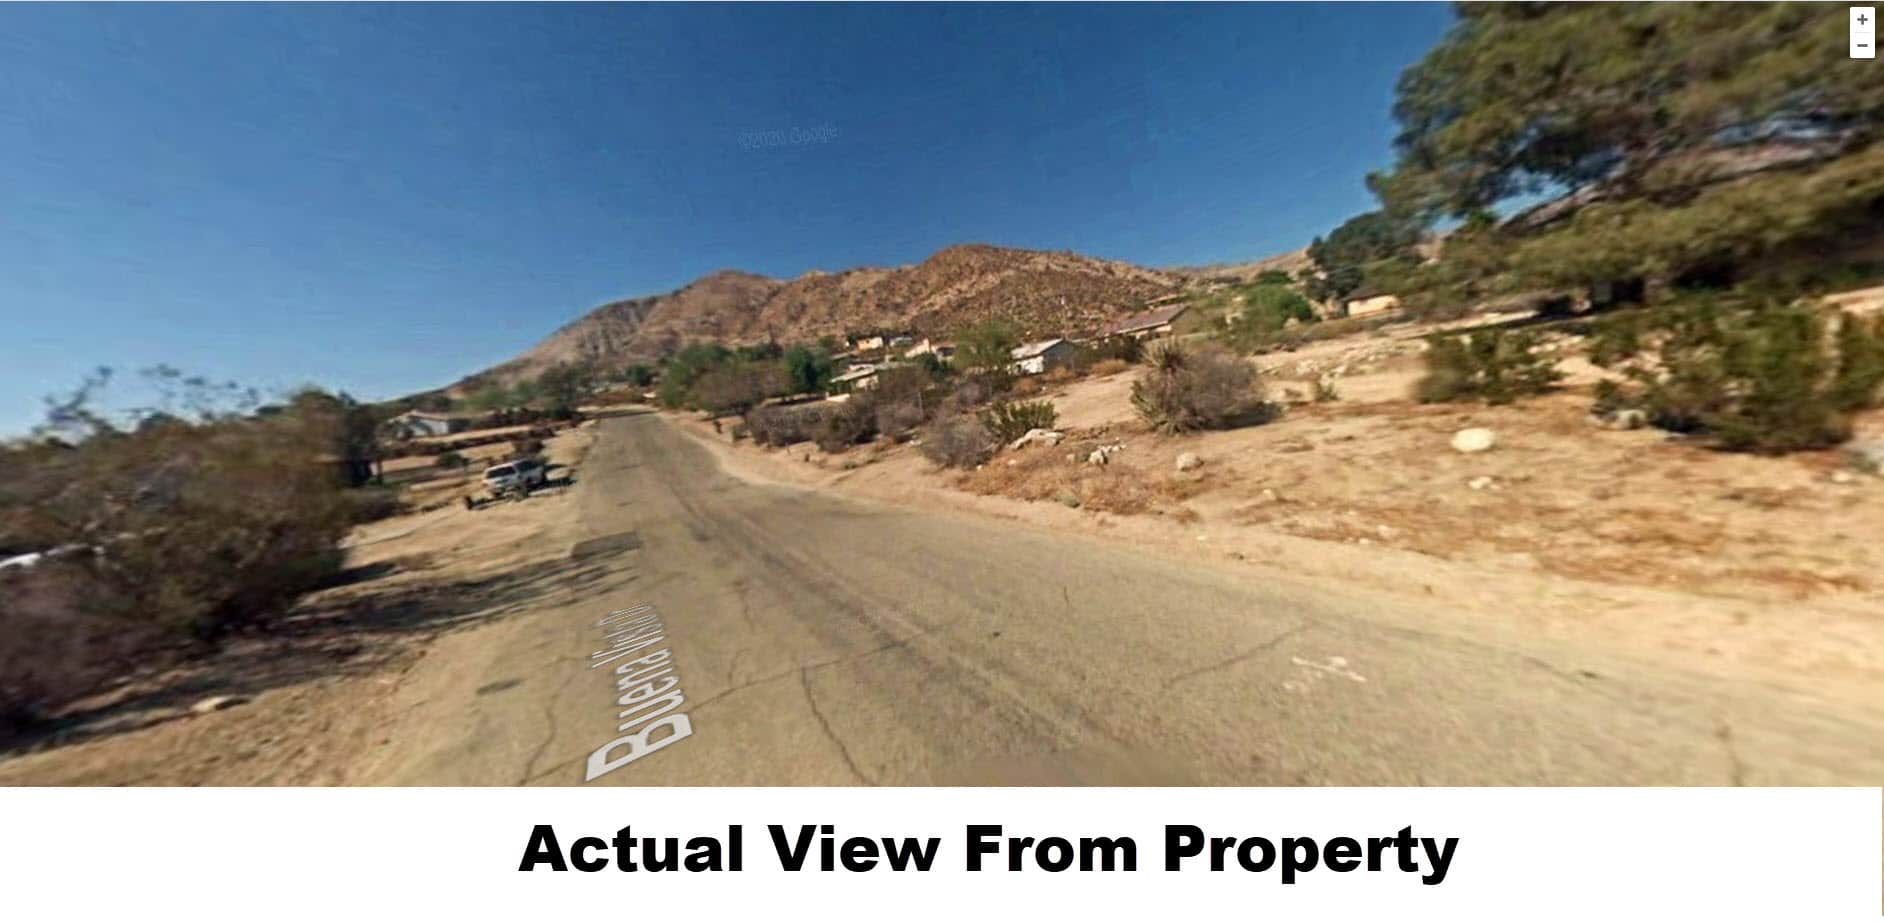 Morongo Valley 17,402 SqFt Lot With Paved Road Frontage